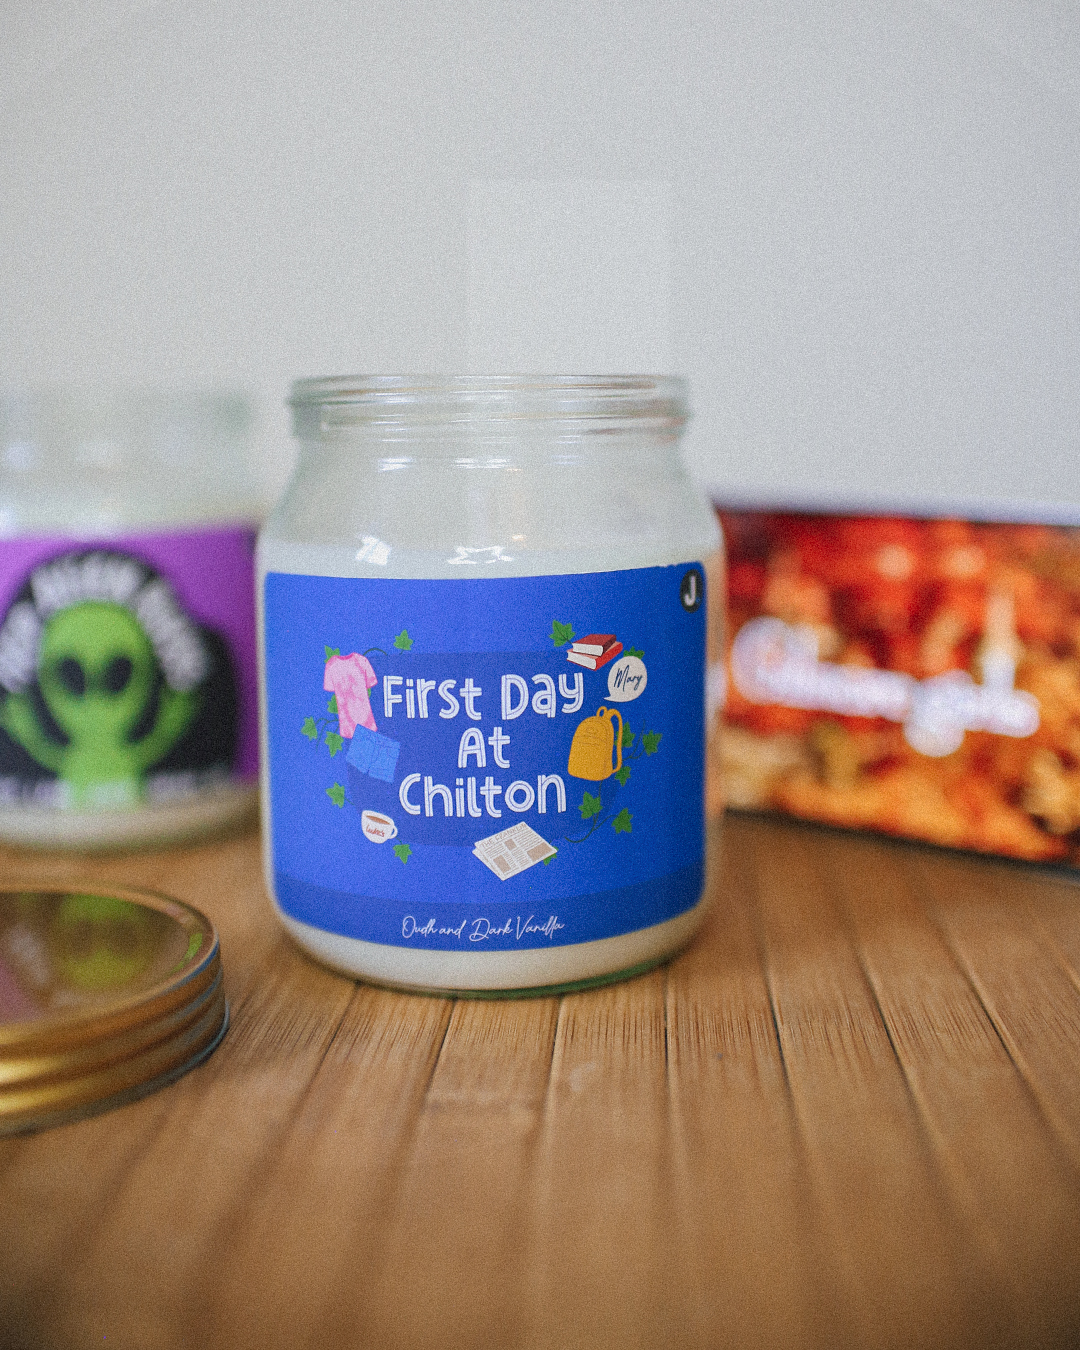 First Day At Chilton Candle (Oudh Wood and Dark Vanilla) - Gilmore Girls Inspired Candle - Rory Gilmore Chilton Candle - First Day At Chilton Gilmore Girls Inspired Candle